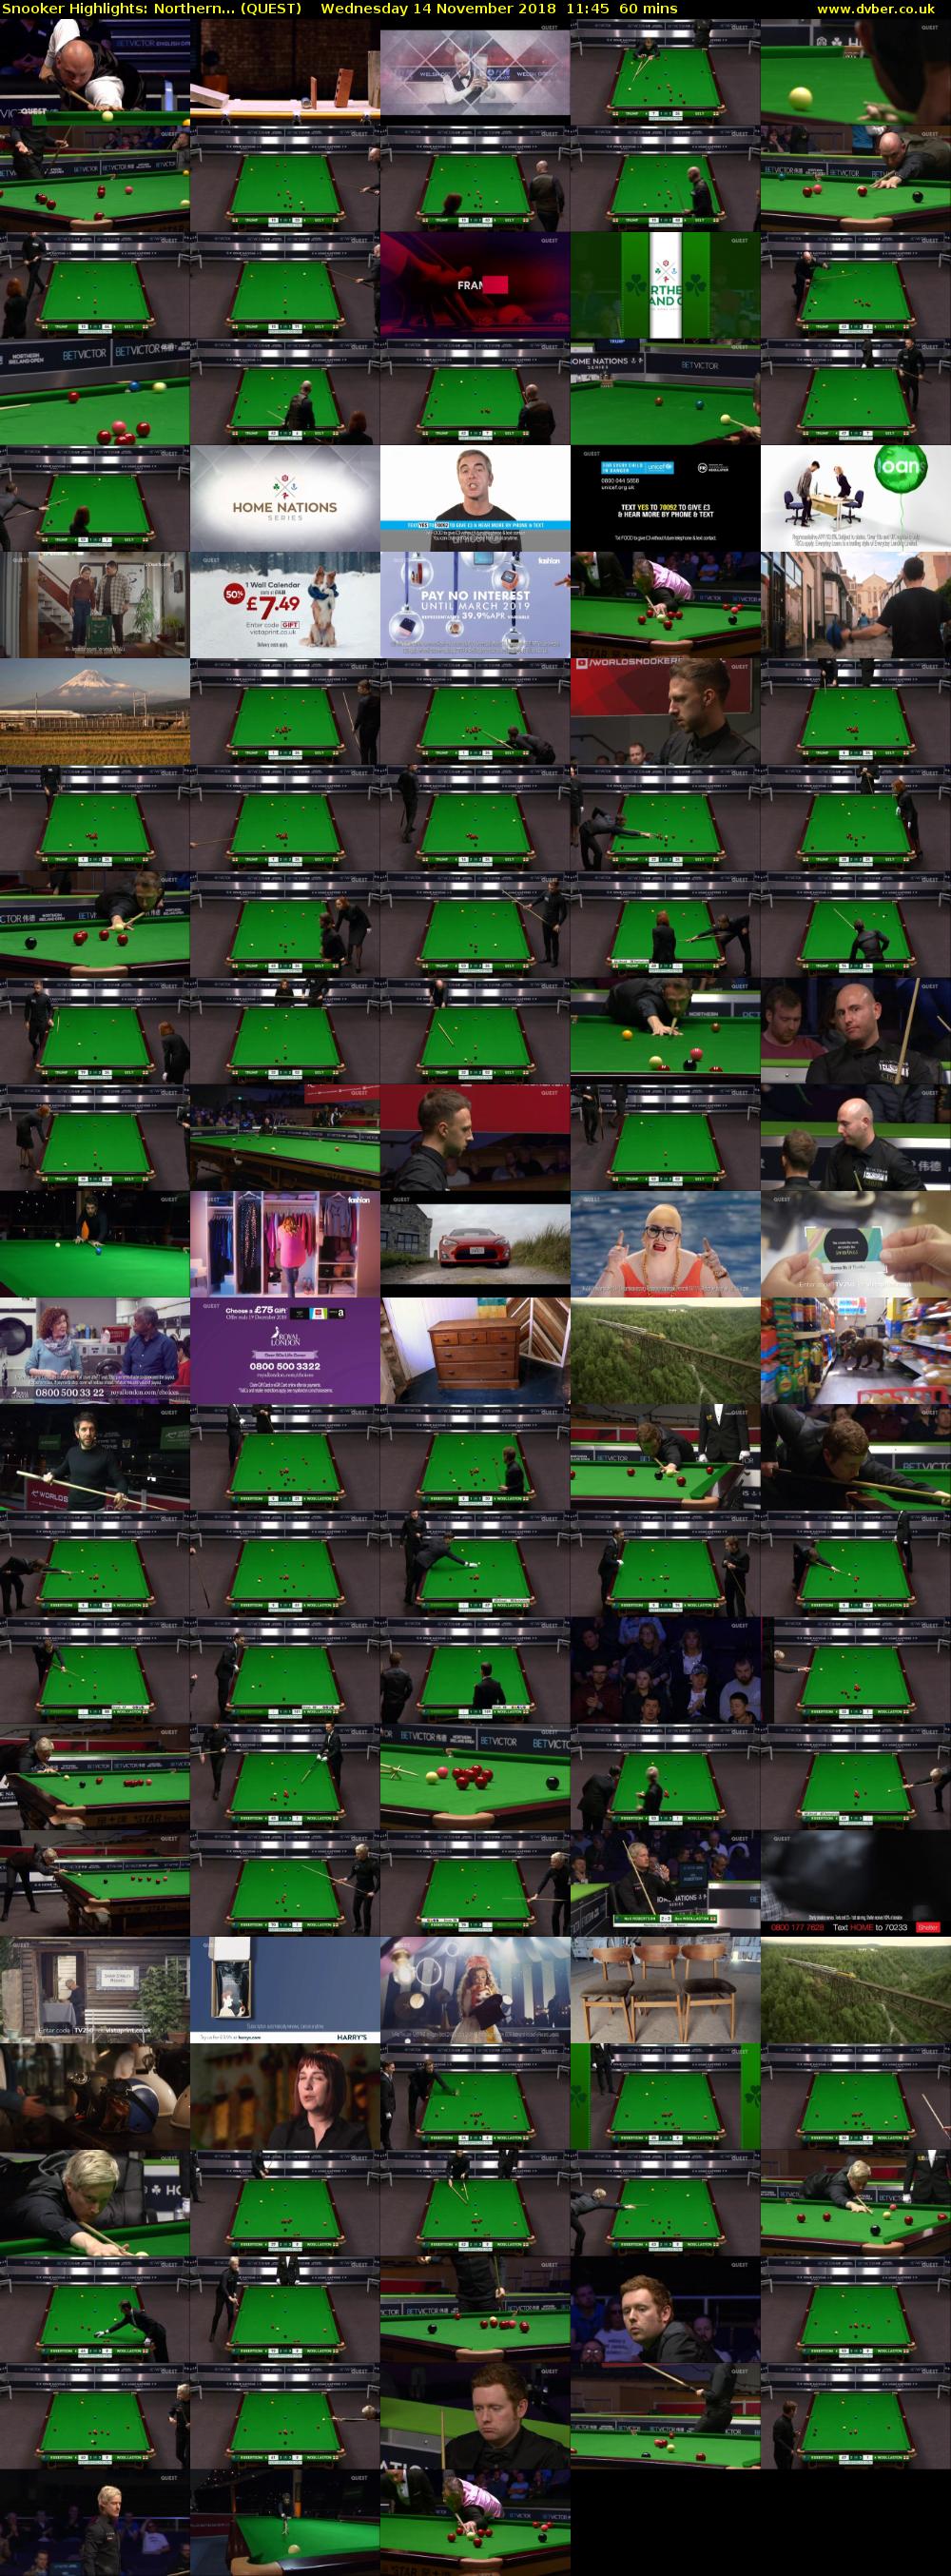 Snooker Highlights: Northern... (QUEST) Wednesday 14 November 2018 11:45 - 12:45